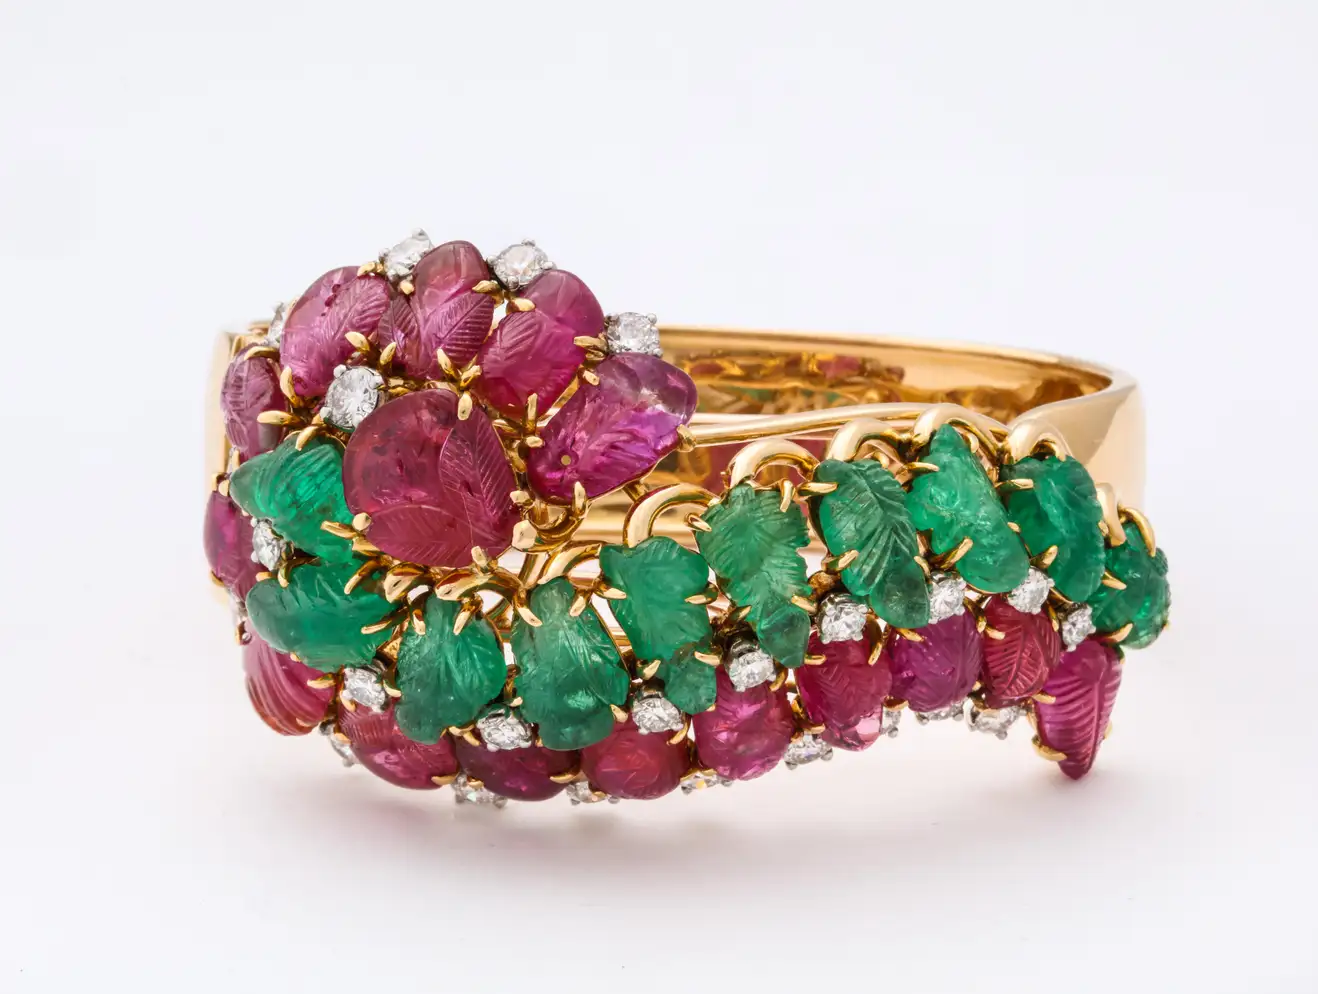 Cartier ruby and emerald bracelet